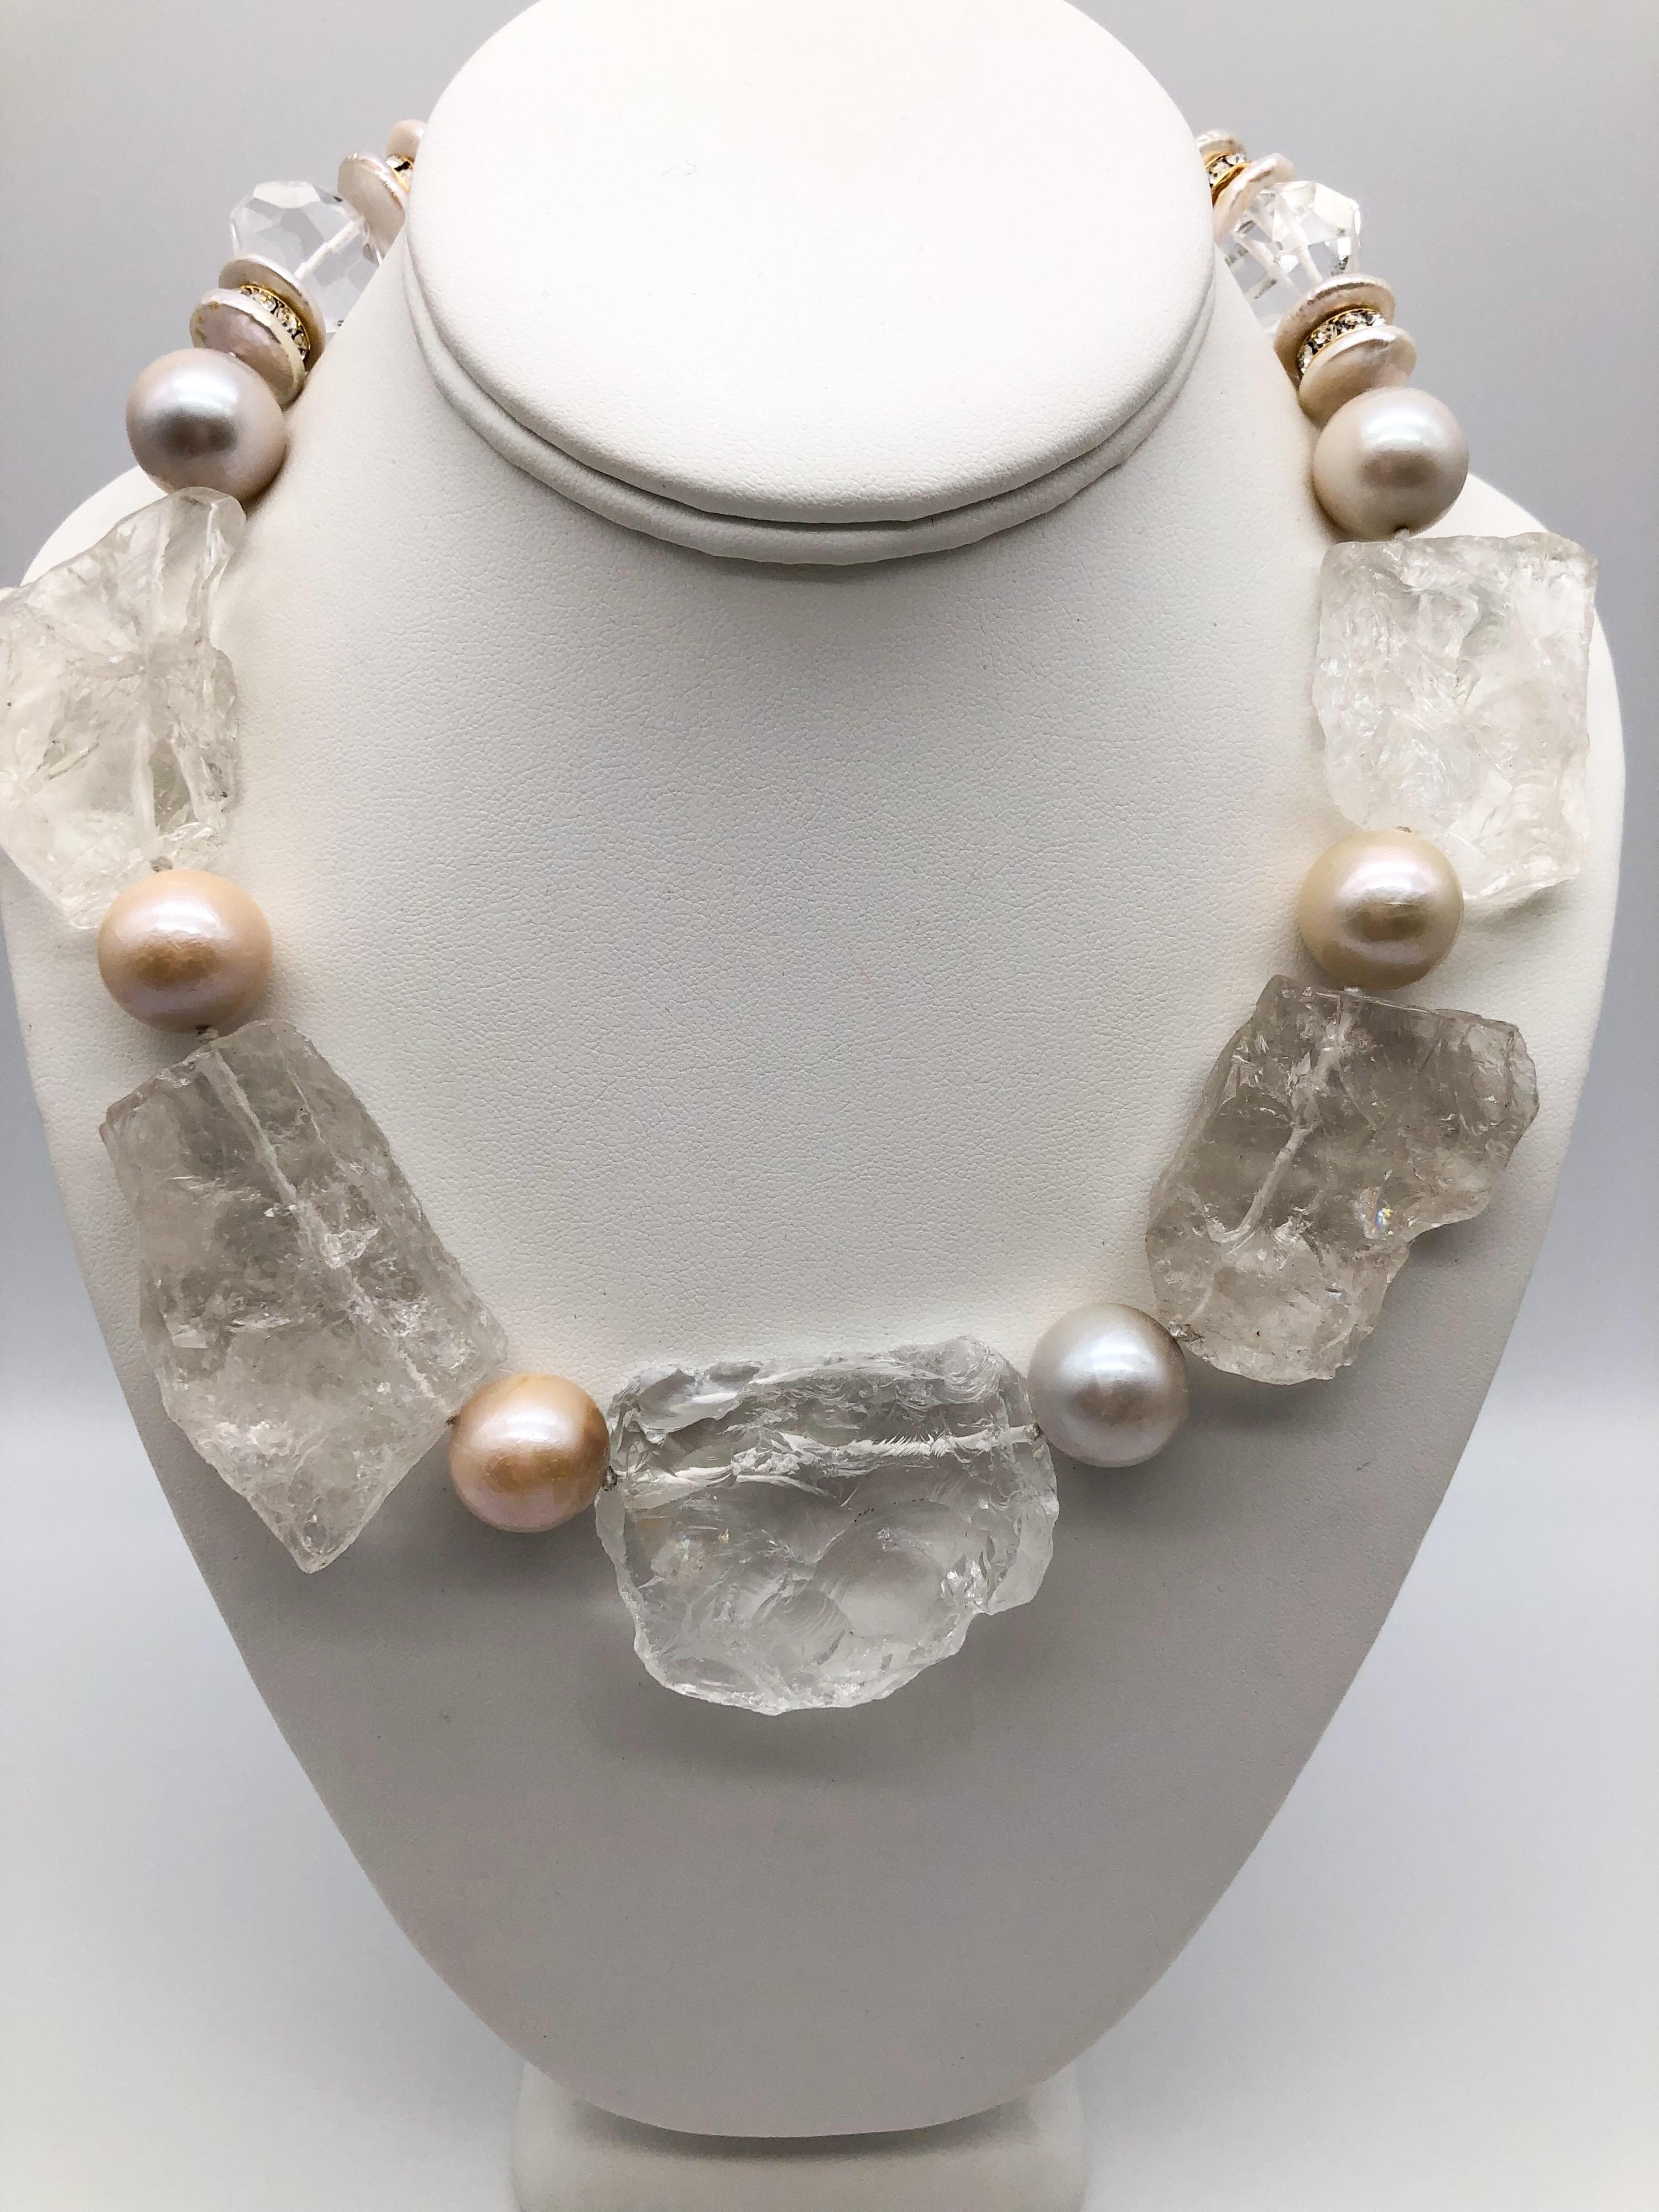 One-of-a-Kind

Massive rich hammered Rock crystal p separated by lustrous 18mm Freshwater Pearls make a brilliant statement. The clasp is Drusy set in Vermeil. The entire necklace is just a “look- me-pieces